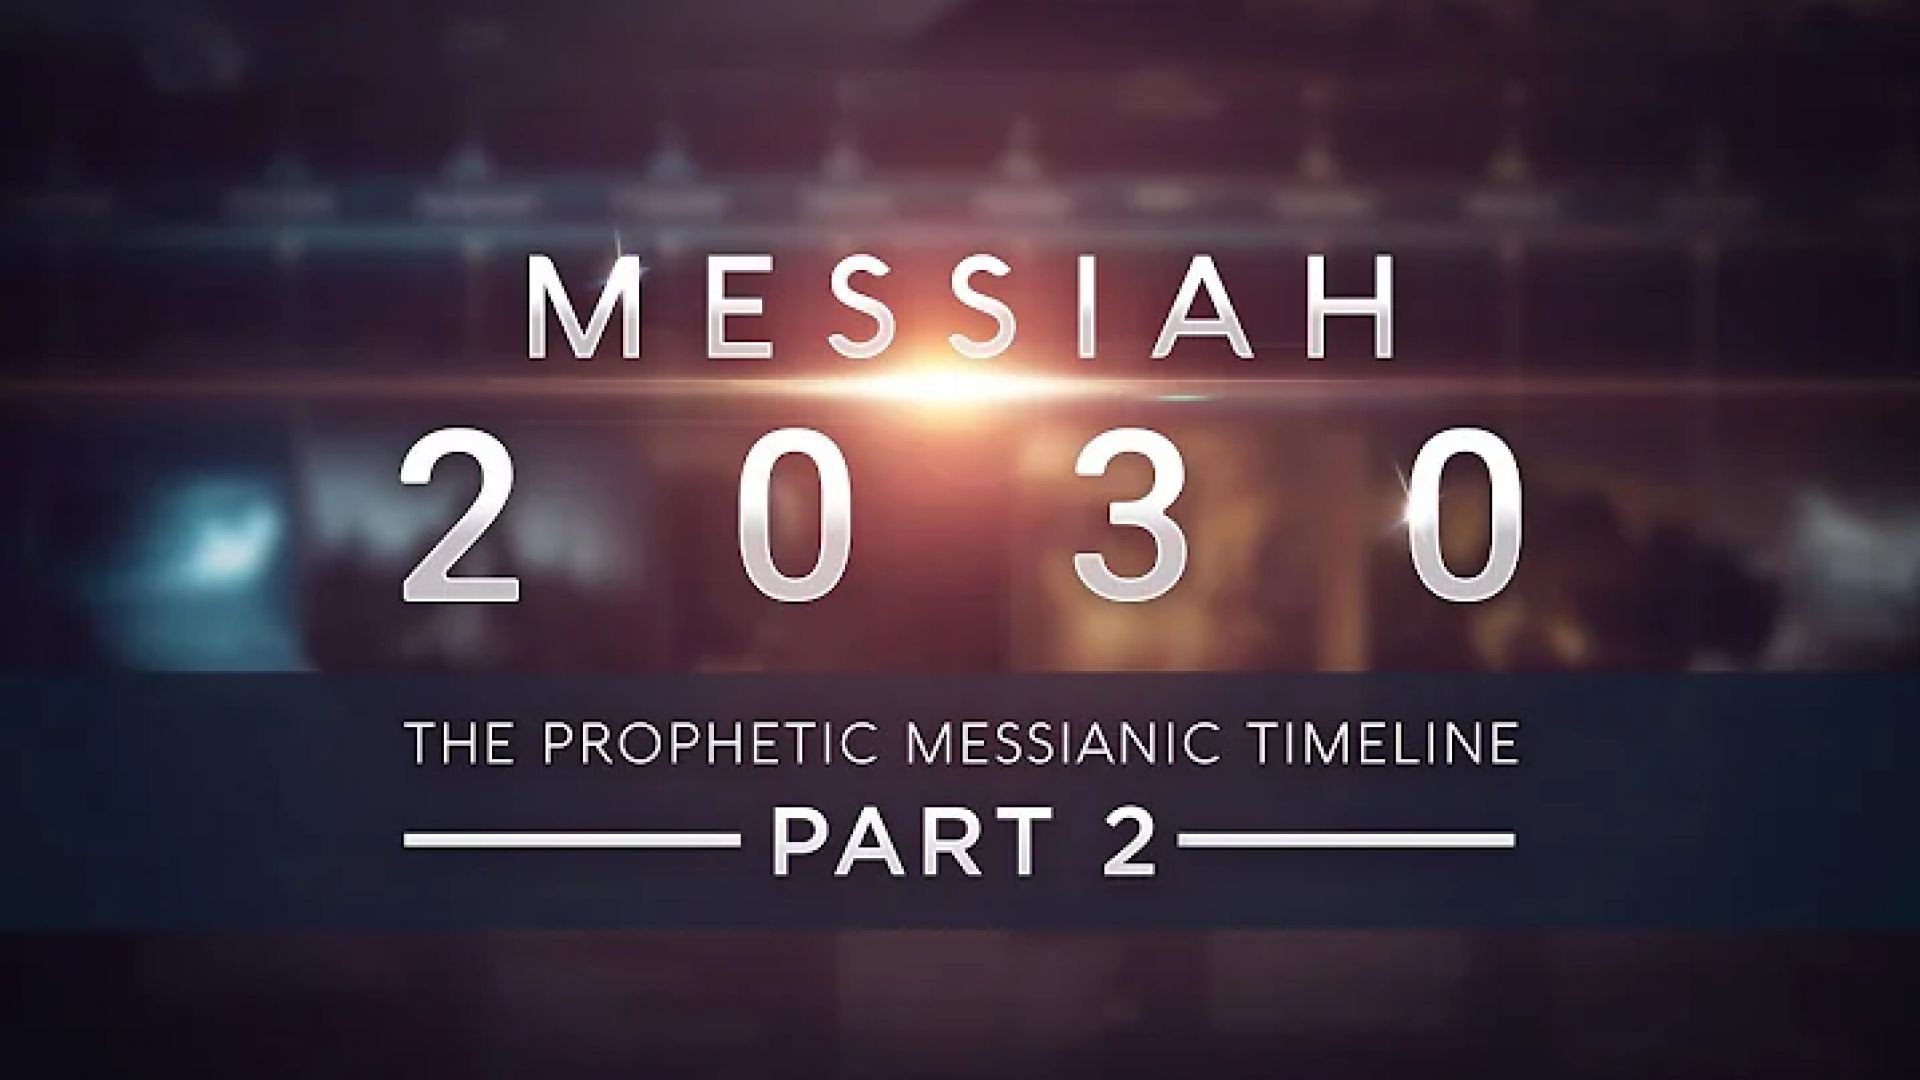 Messiah 2030 ~ The Prophetic Messianic Timeline - Part 2